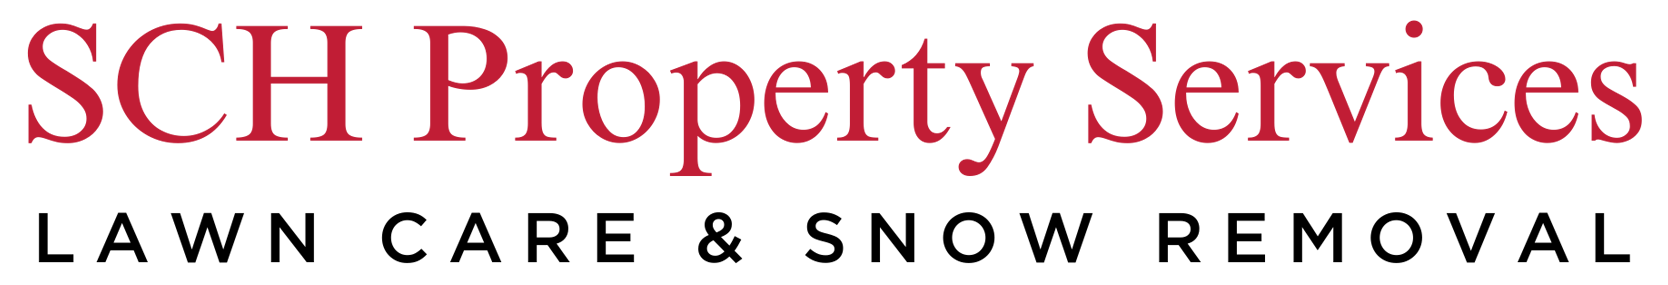 the logo for sch property services lawn care and snow removal